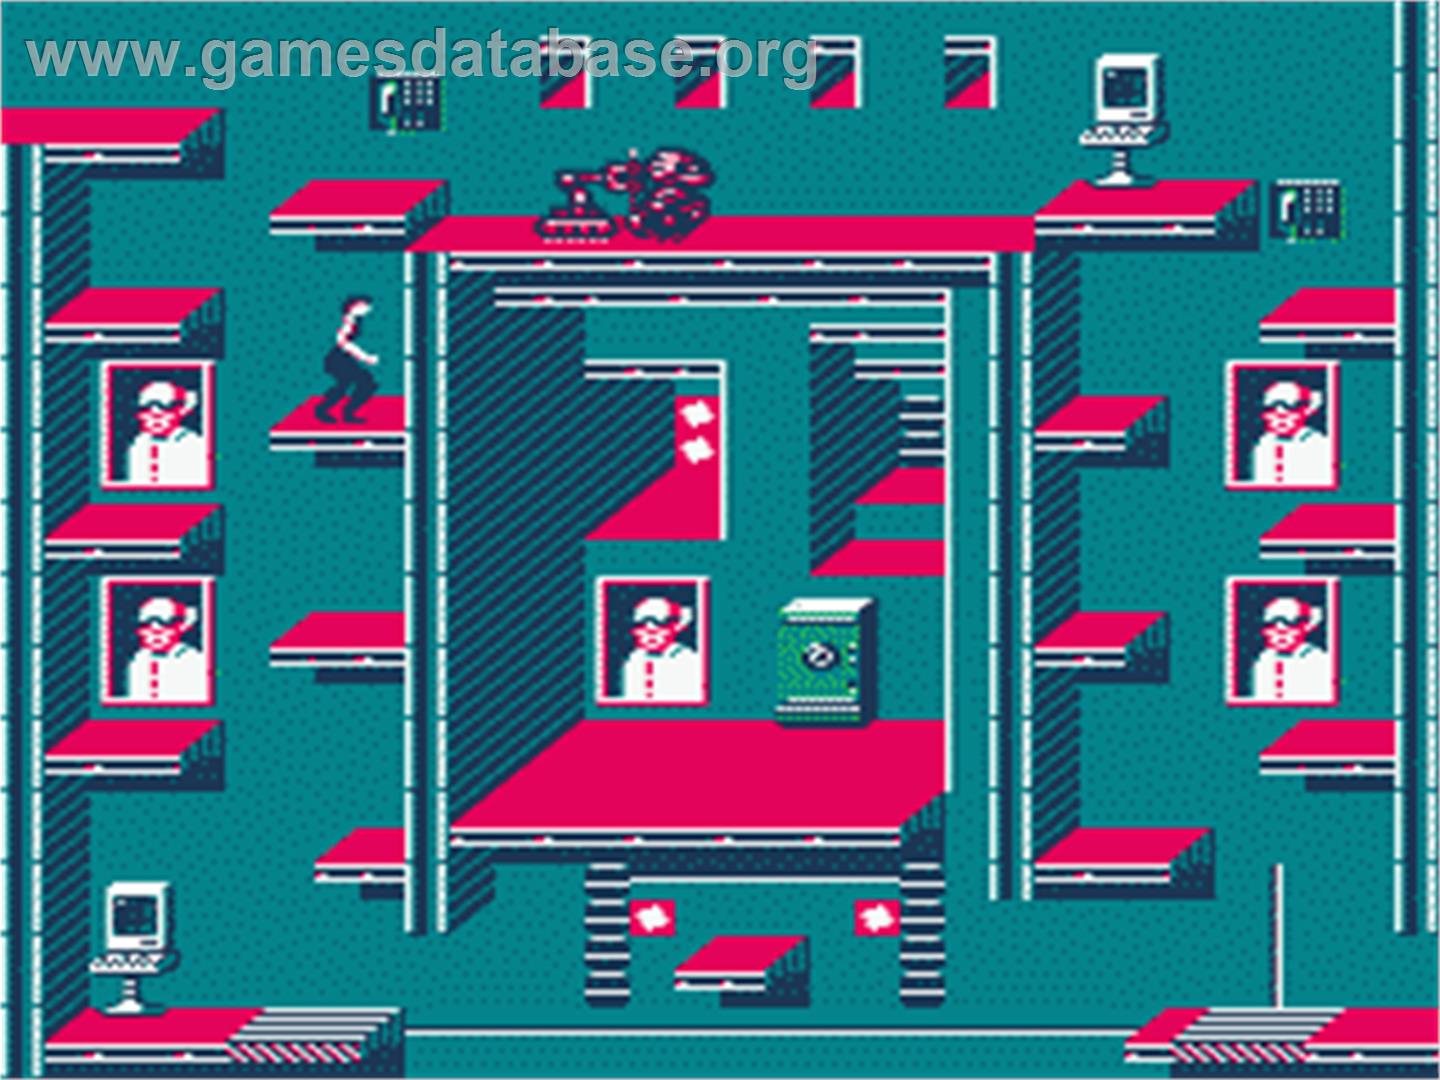 Impossible Mission 2 - Nintendo NES - Artwork - In Game